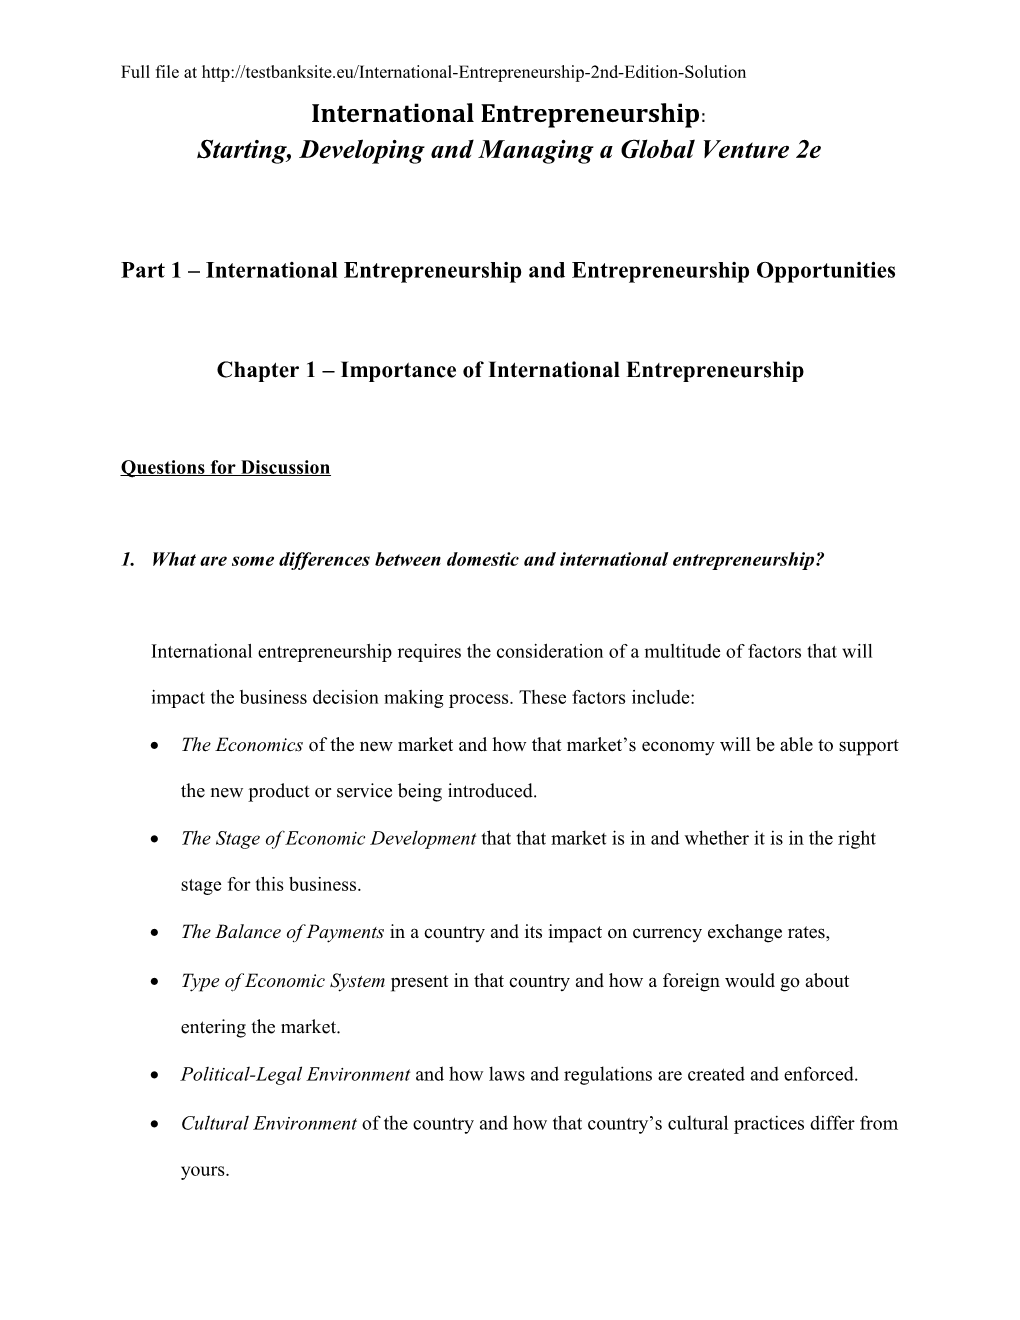 Starting, Developing and Managing a Global Venture 2E